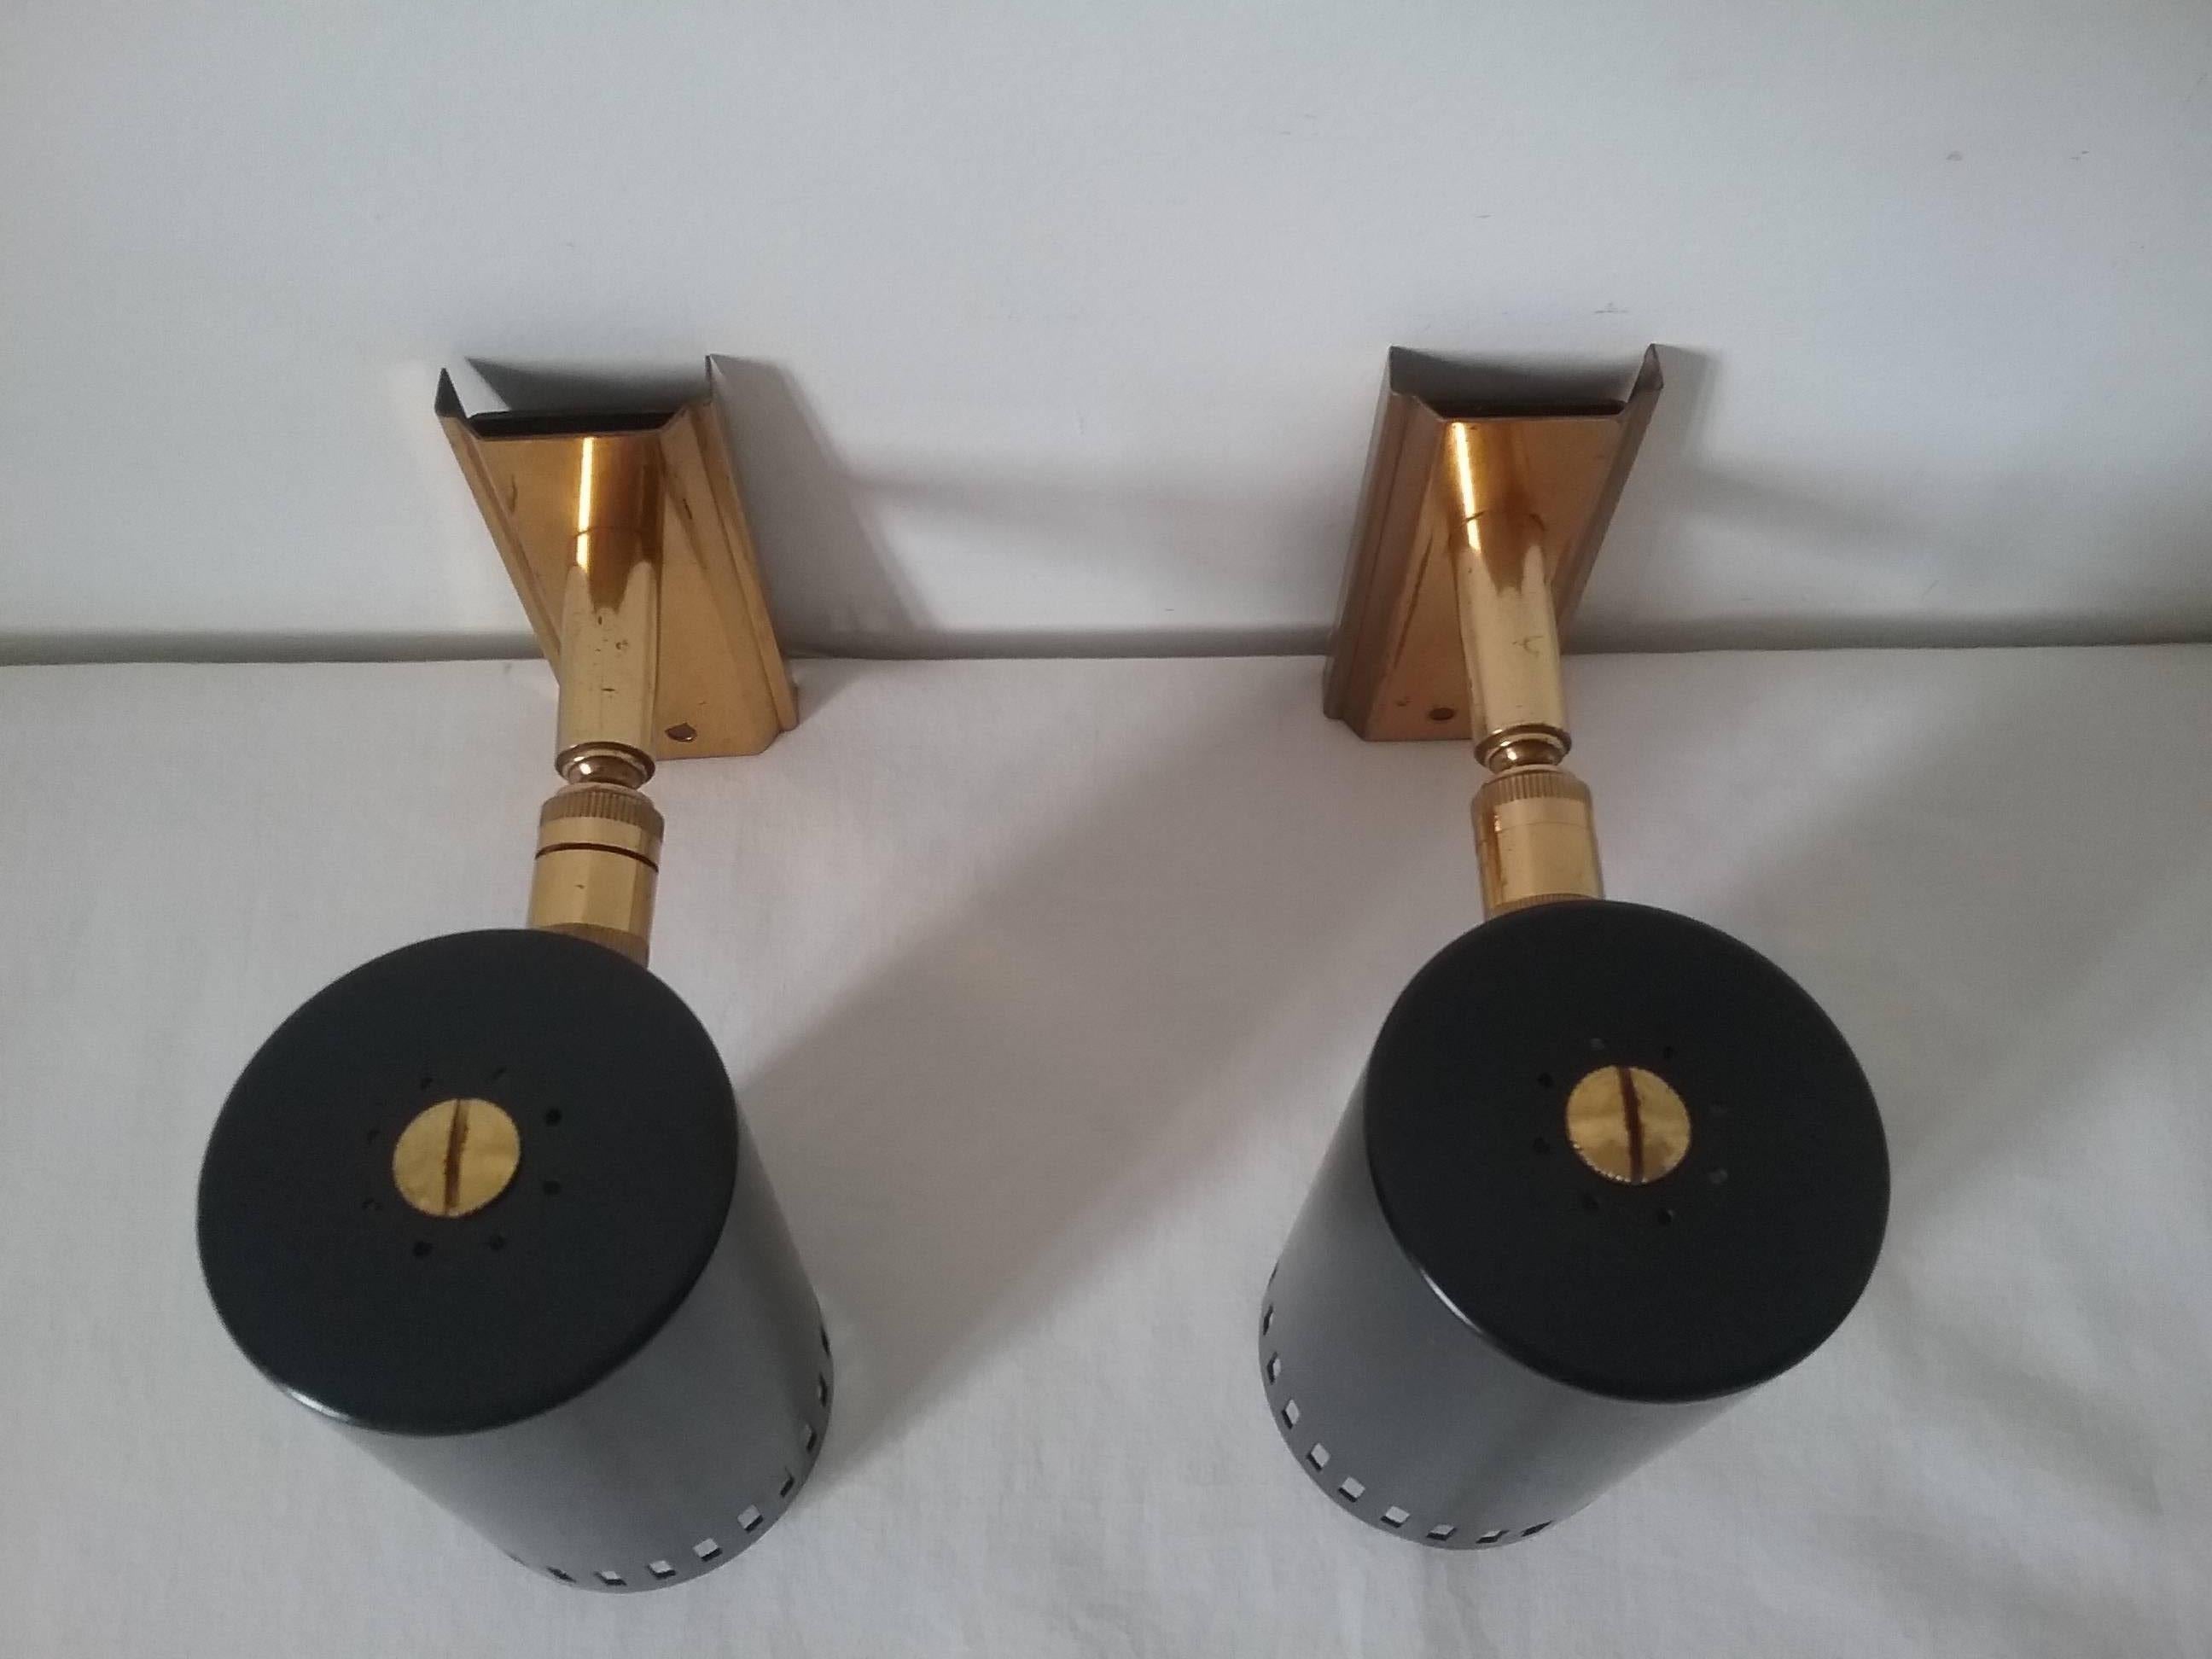 Painted 1950s Pair of French Adjustable Spot Lights in Black Metal by Disderot